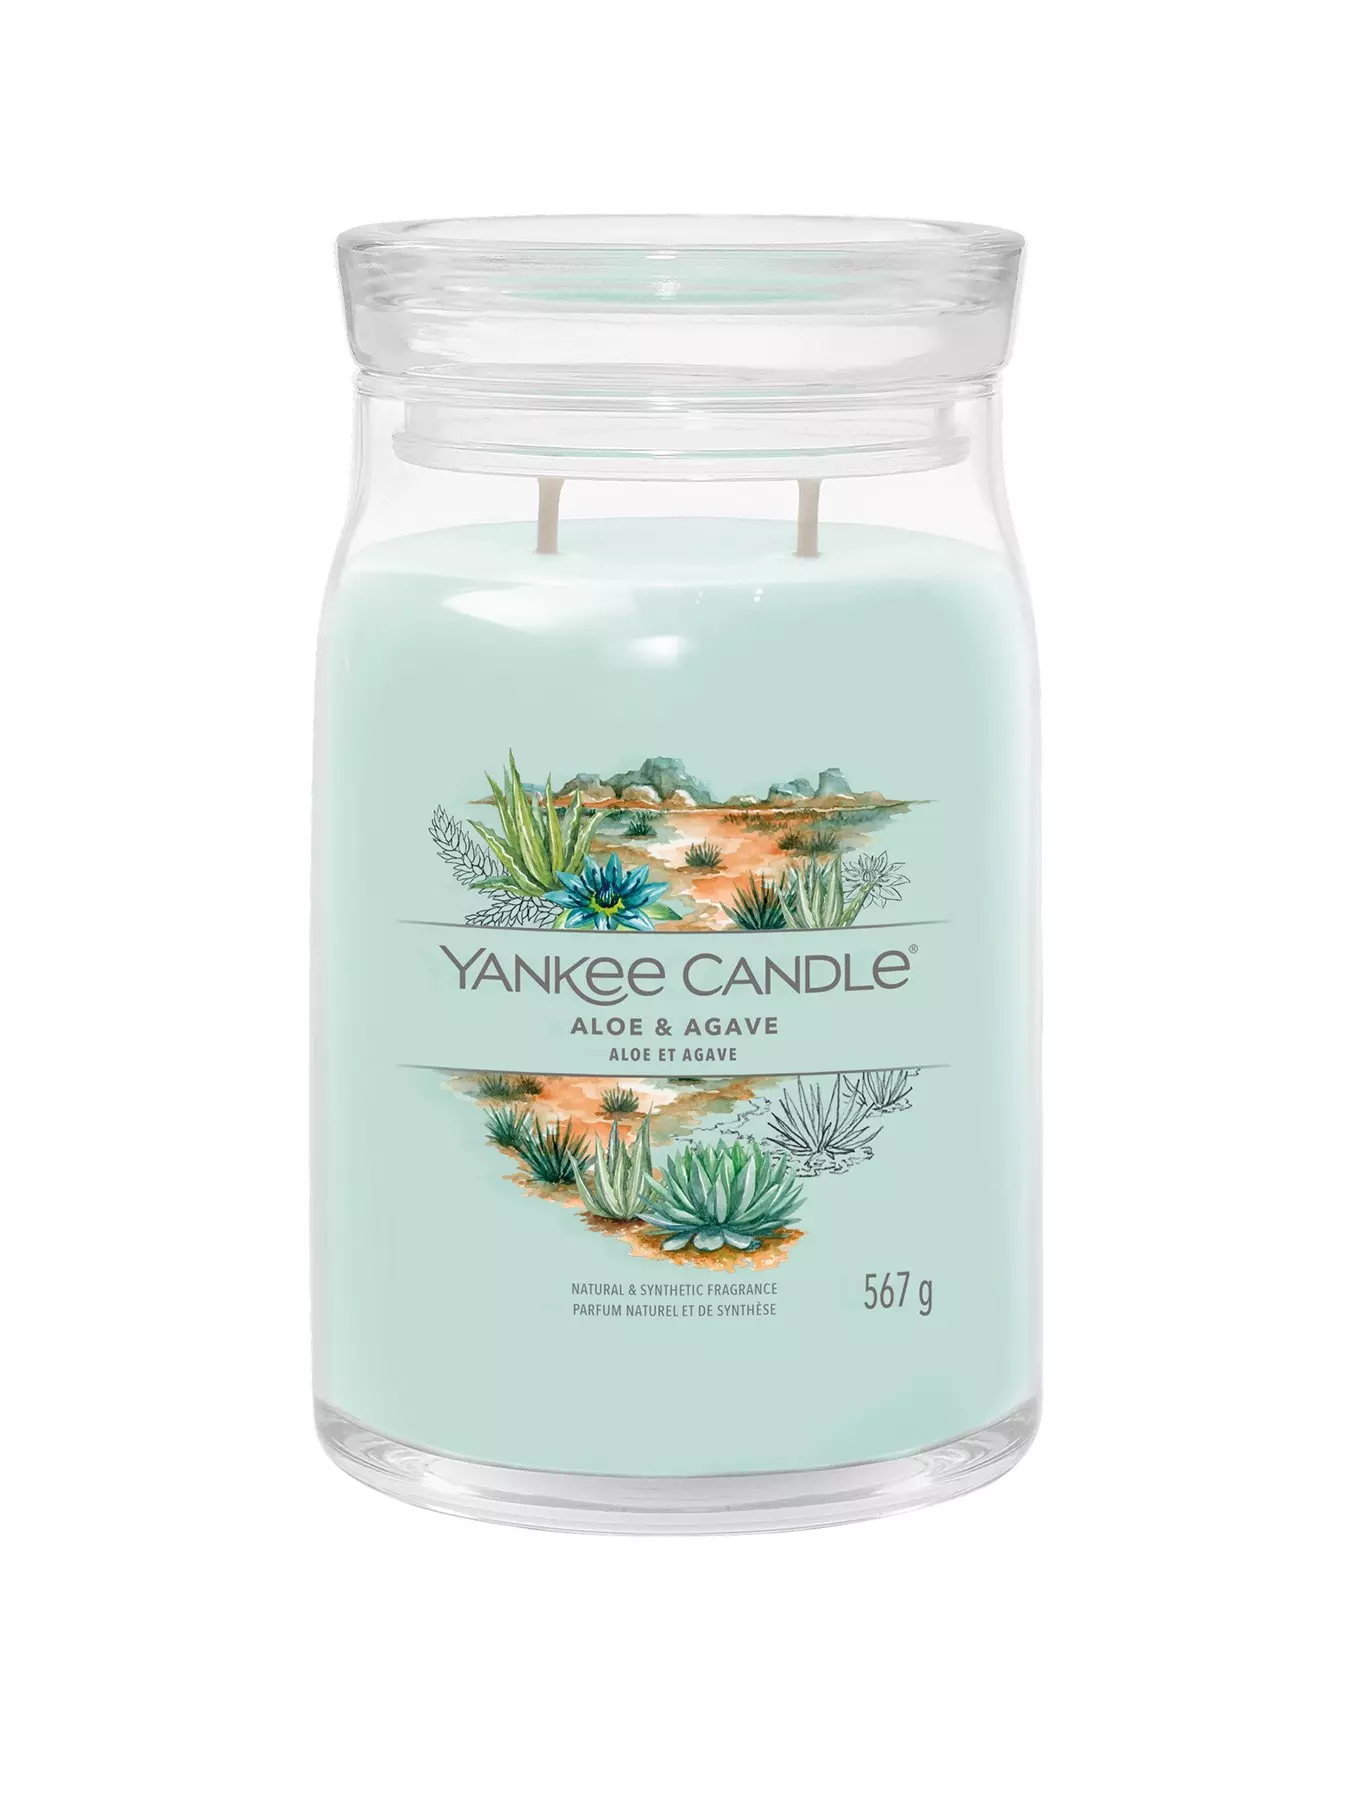 Yankee Candle Balsam & Cedar - 22 oz Large Modern Brushed Lid Tumbler  Candle: Holiday/Seasonal, Woody Scented, 2-wick Soy Wax Blend with 75 Hours  Burn